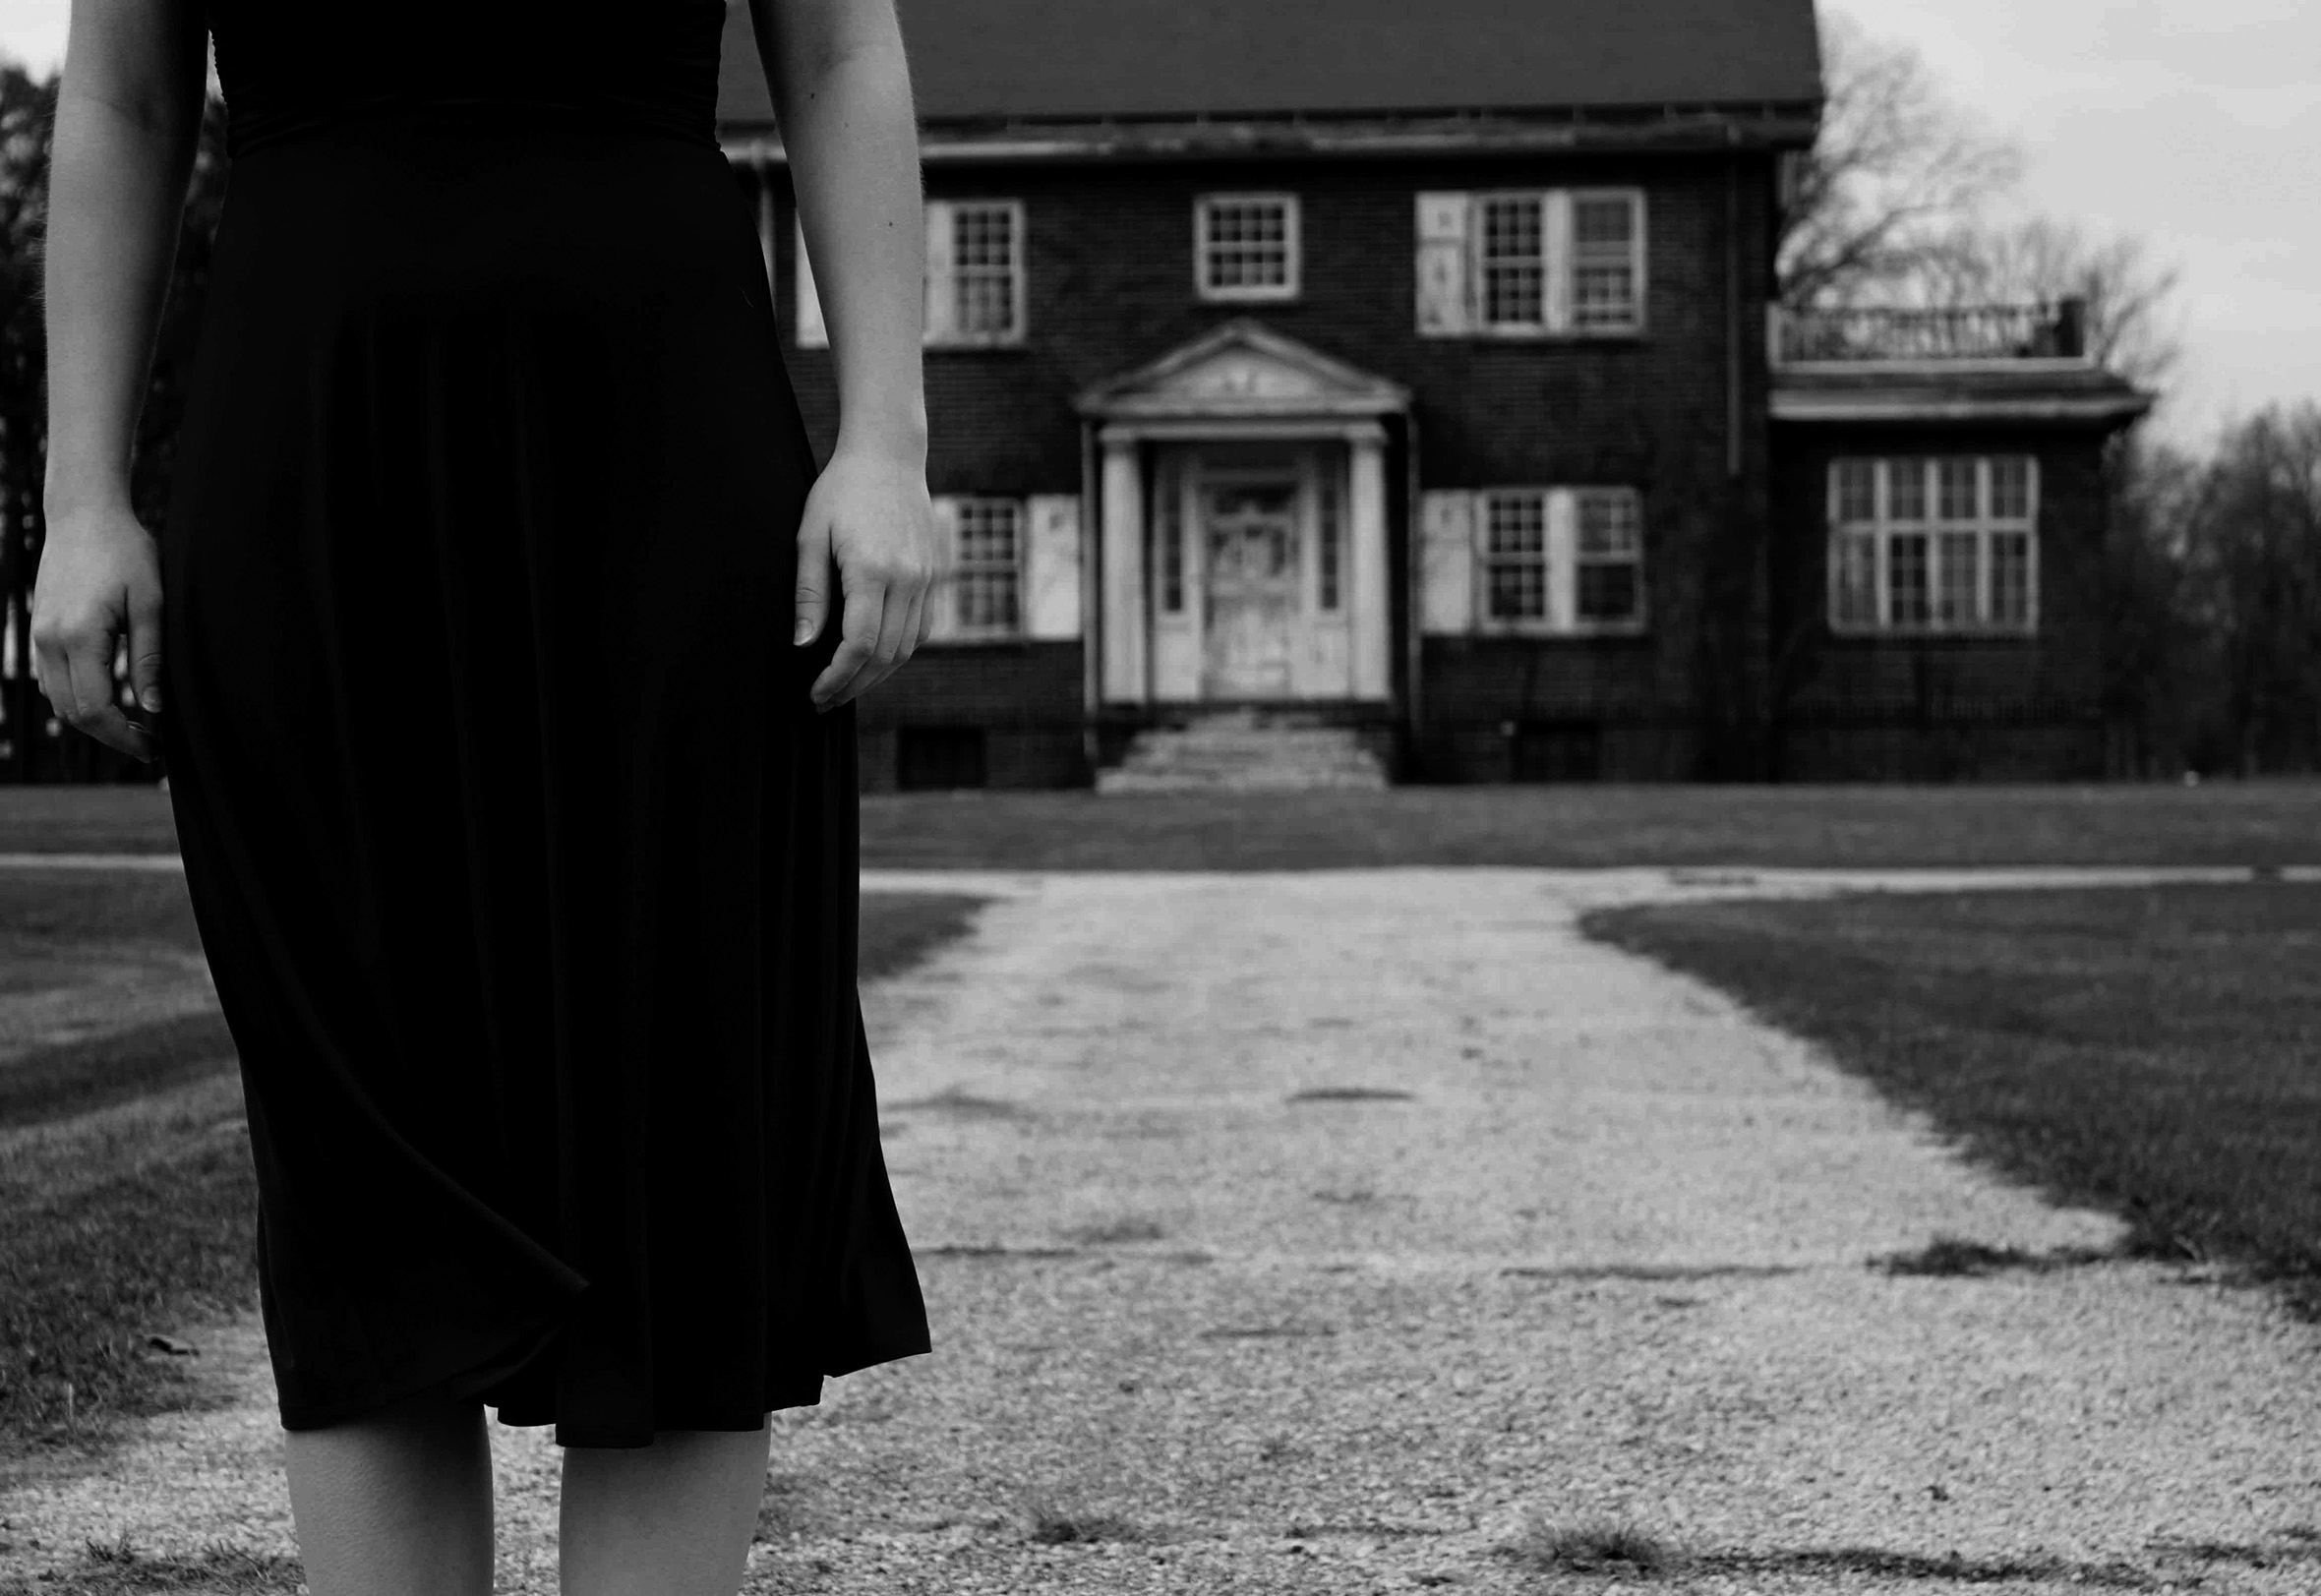 A woman in a dress and facing the camera is seen from the midriff to below the knee with her arms straight down. She is standing on a sidewalk at a distance from the front of an old two-story house.